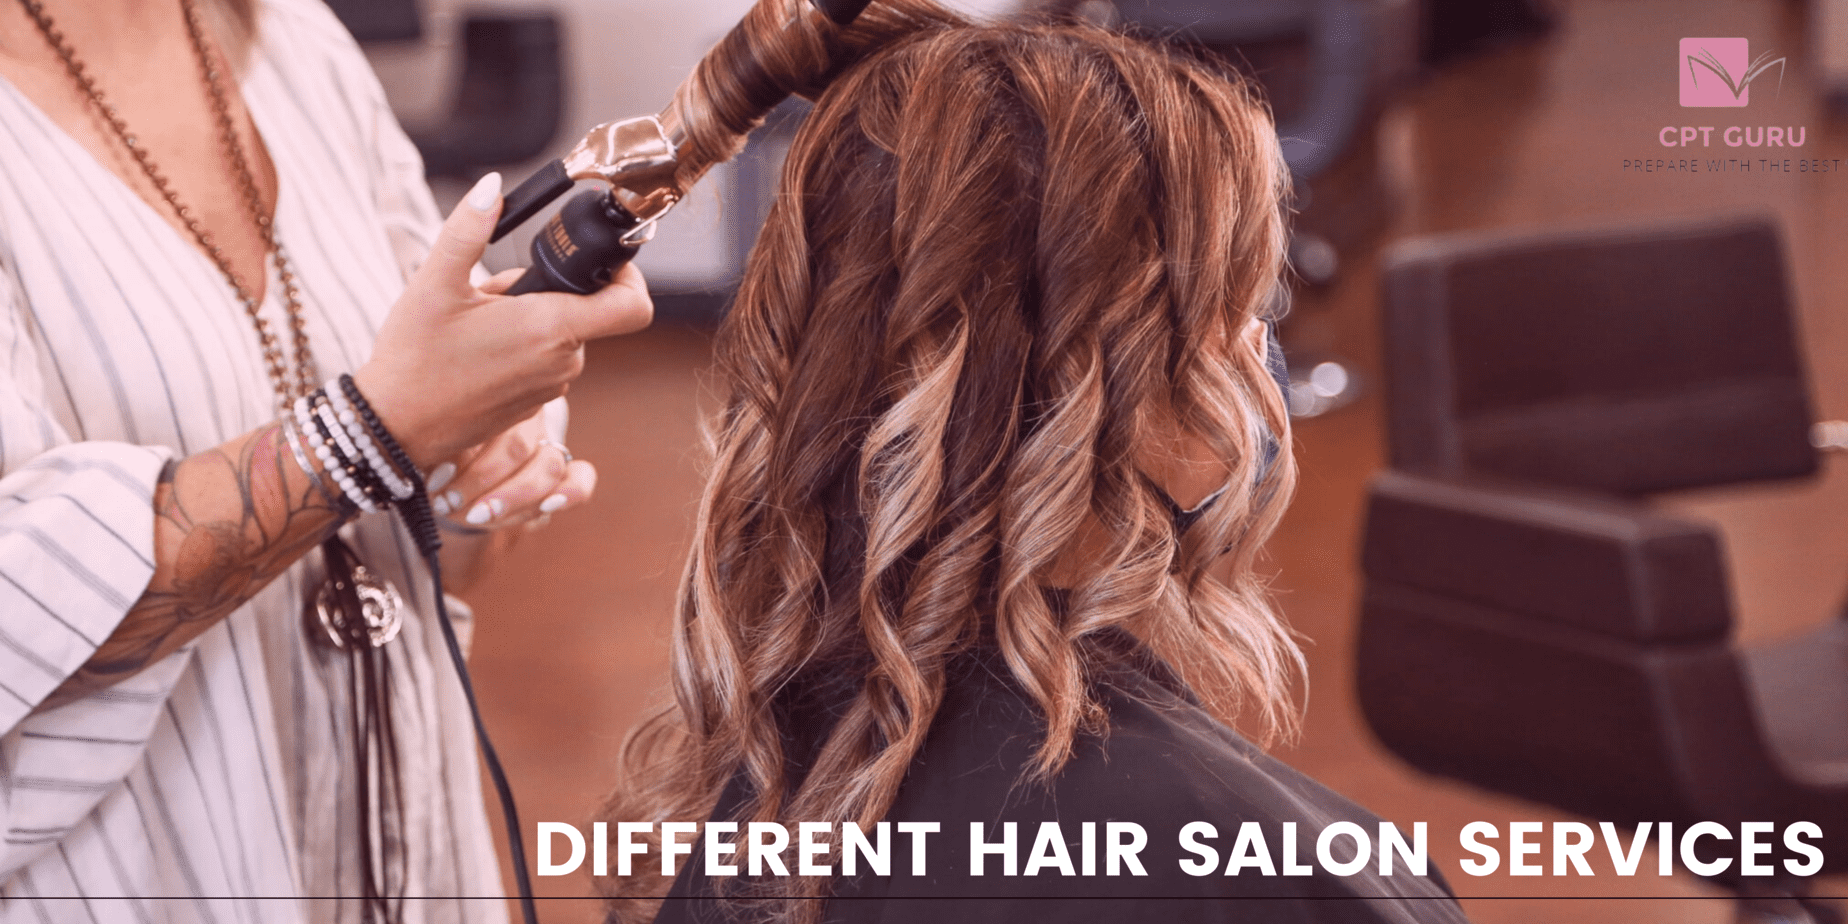 Different hair care services in beauty salons